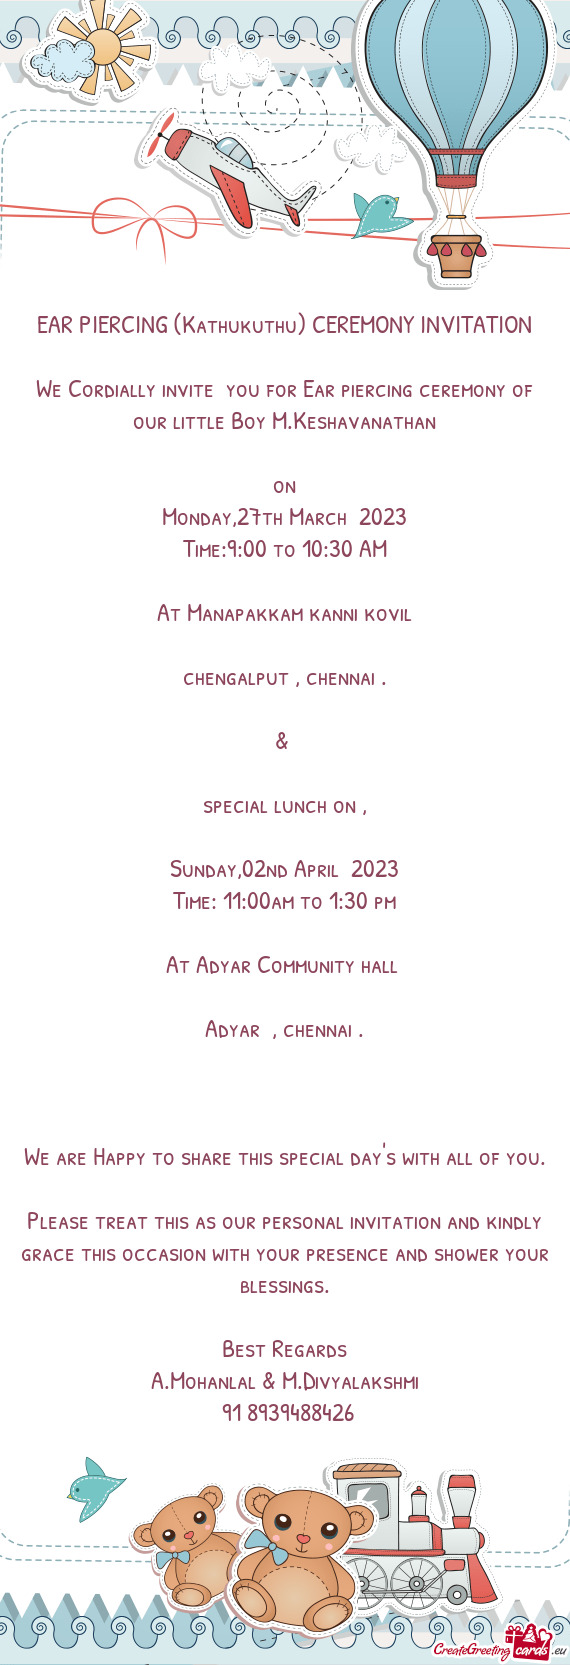 We Cordially invite you for Ear piercing ceremony of our little Boy M.Keshavanathan